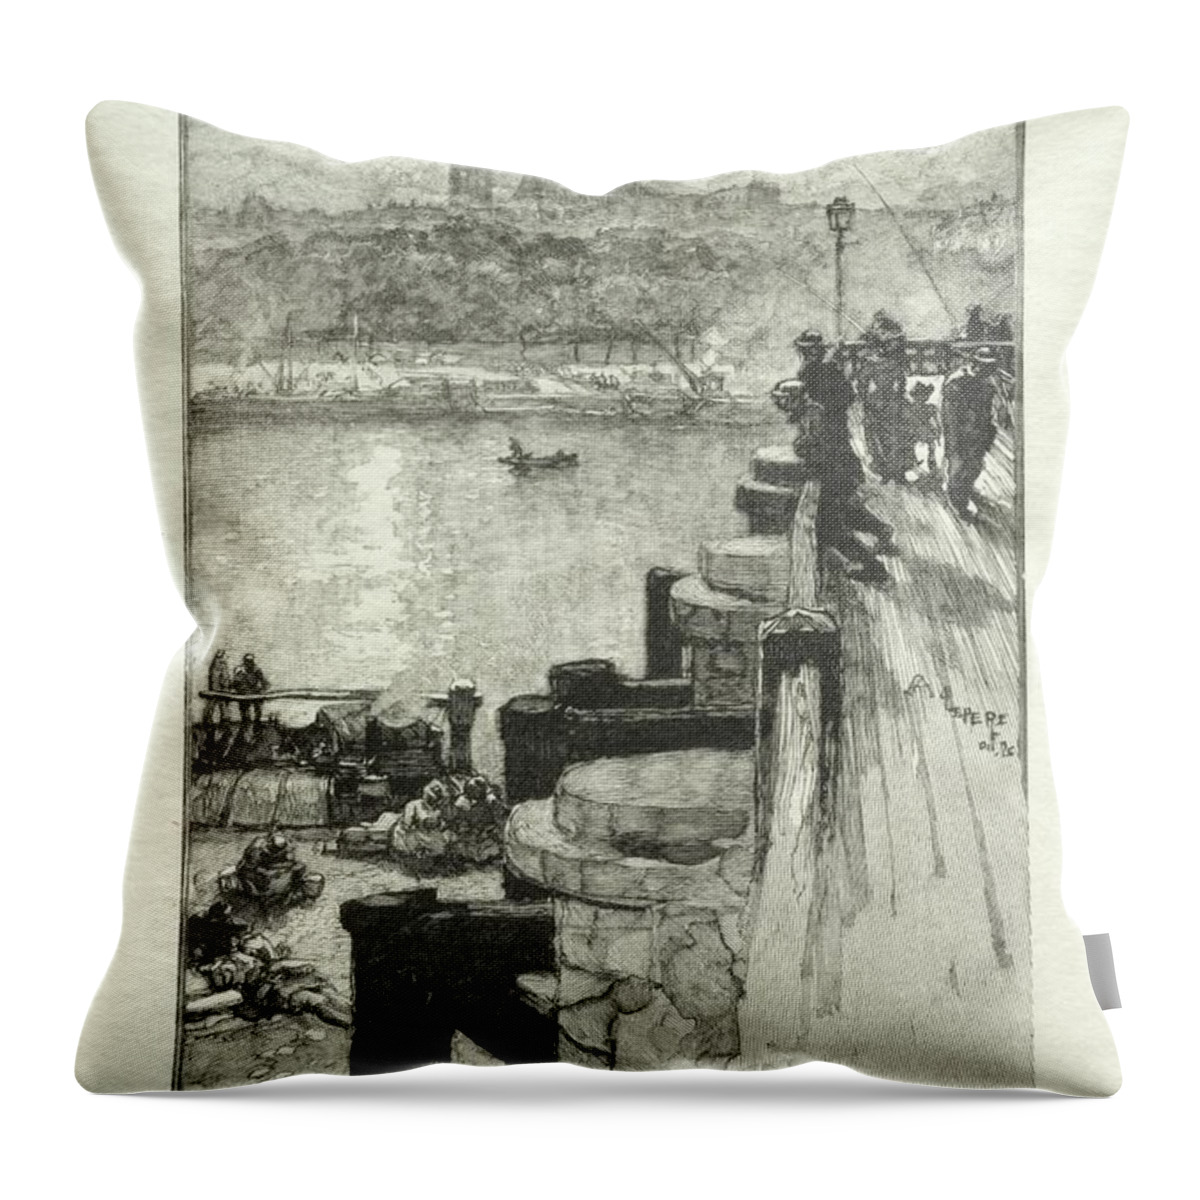 Montagne Ste. Genevieve 1890 Auguste Louis Lepere Throw Pillow featuring the painting Montagne Ste. Genevieve 1890 Auguste Louis Lepere by MotionAge Designs